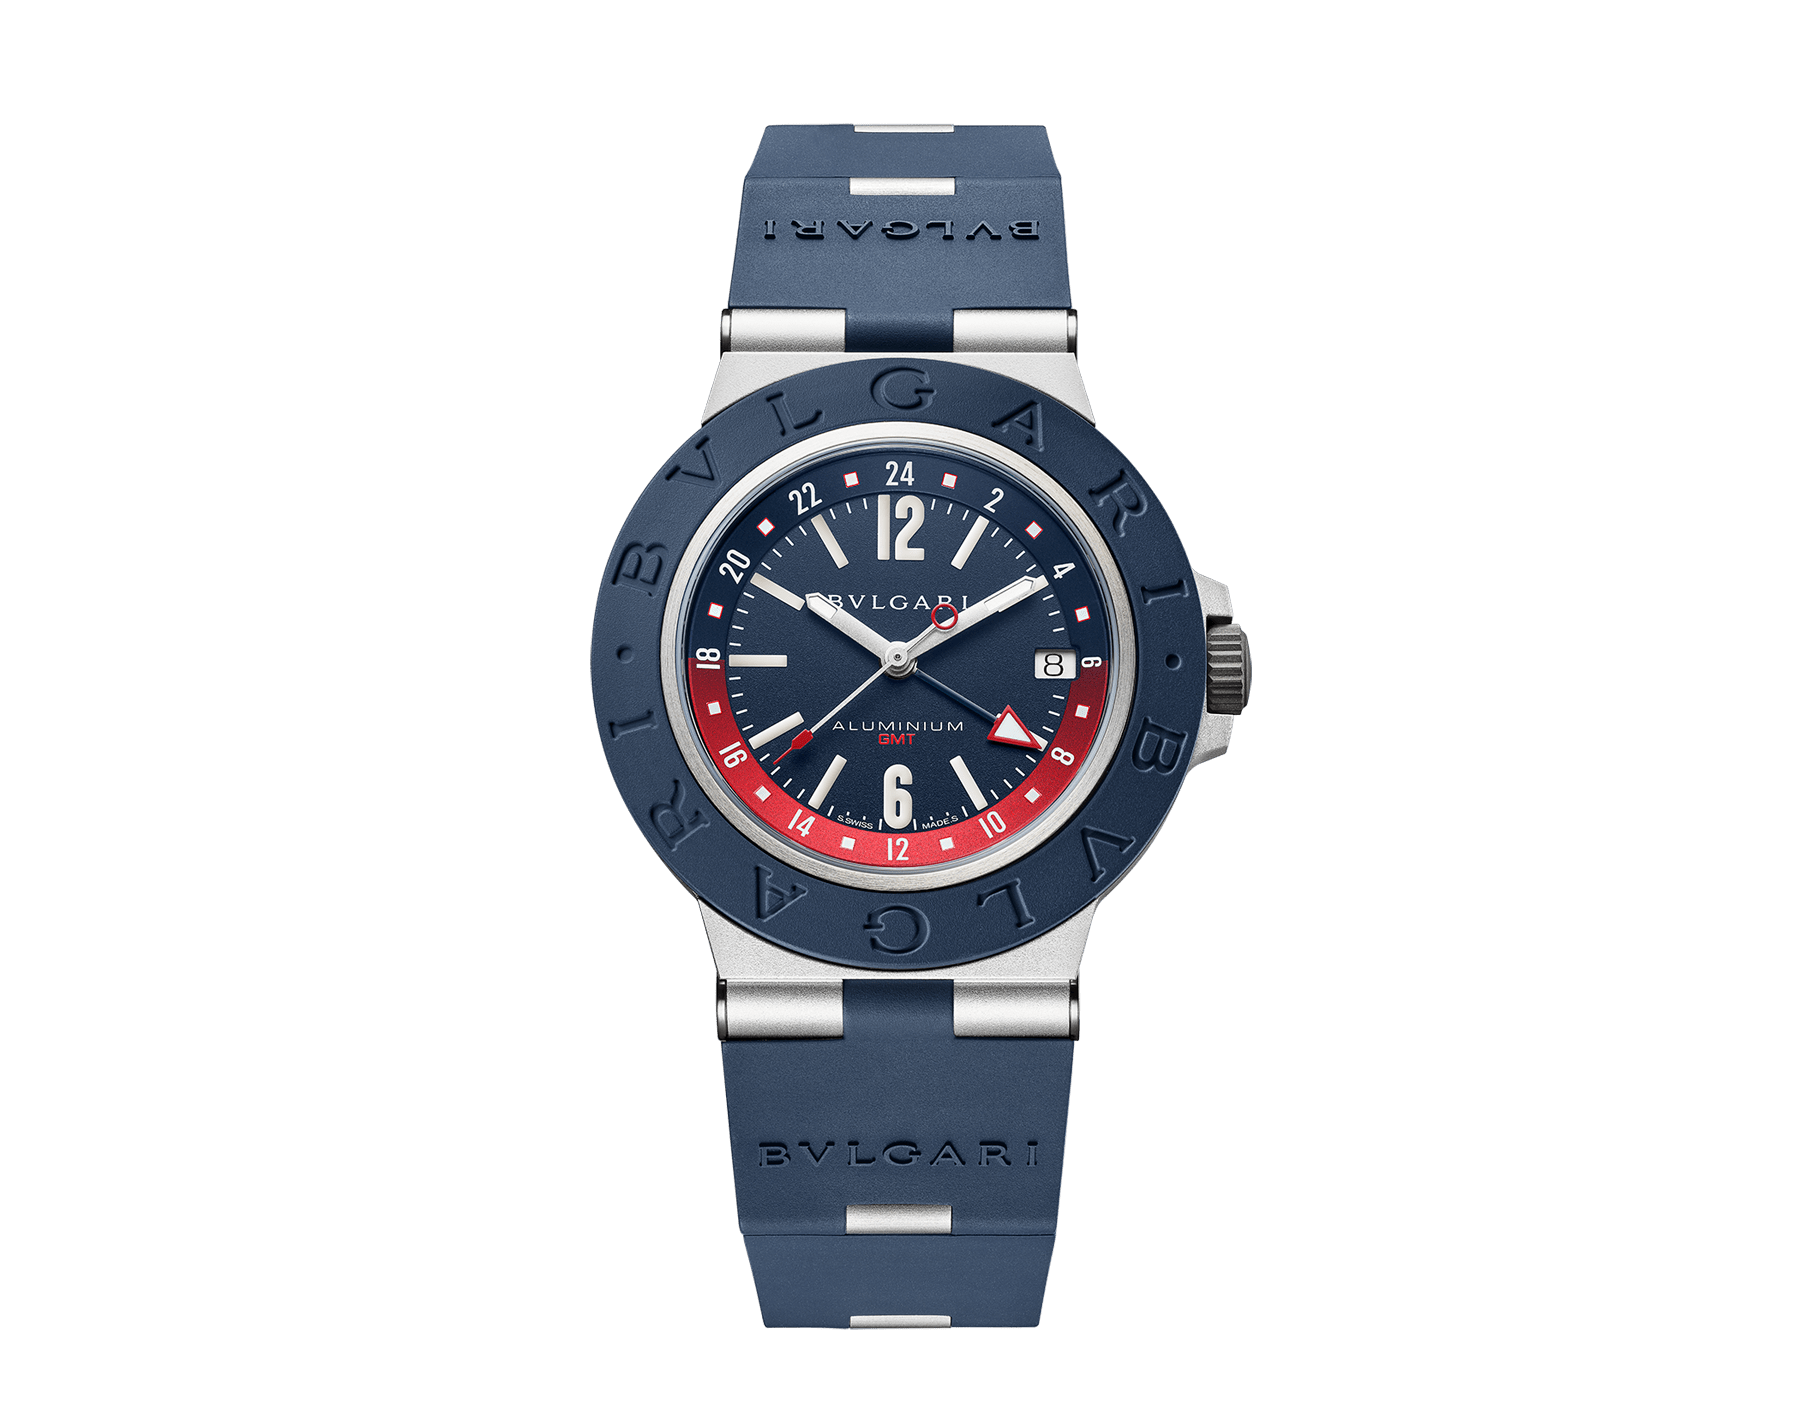 BVLGARI Aluminium GMT watch with mechanical movement, automatic winding, GMT 24h function, 40 mm aluminium case, blue rubber bezel with double logo engraving, blue dial, SLN indexes and hands, titanium caseback, aluminium links and blue rubber bracelet. Water-resistant up to 100 metres 103554 image 1